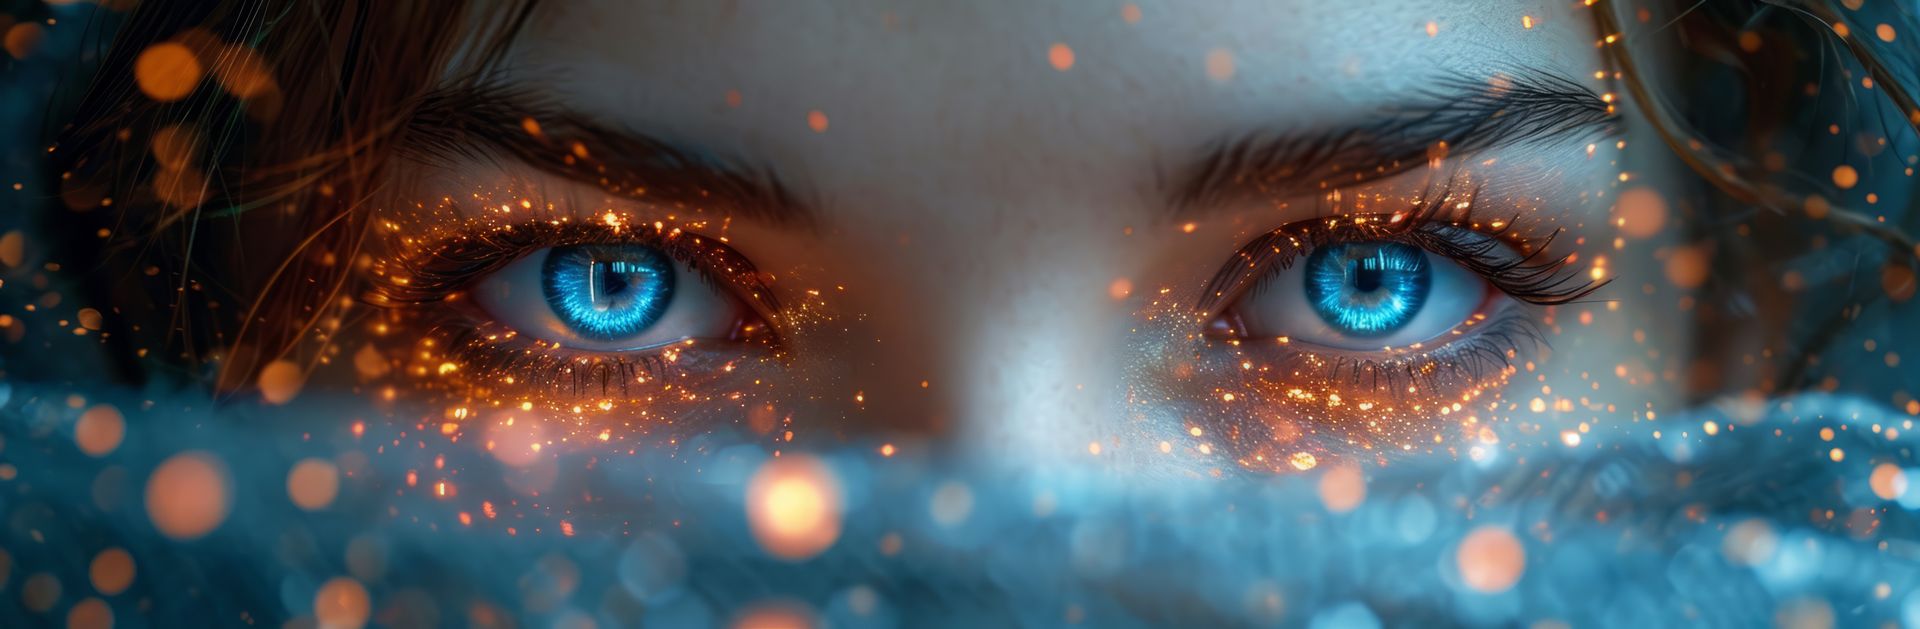 A close up of a woman's eyes and eyebrows with a mystical, futuristic aura 